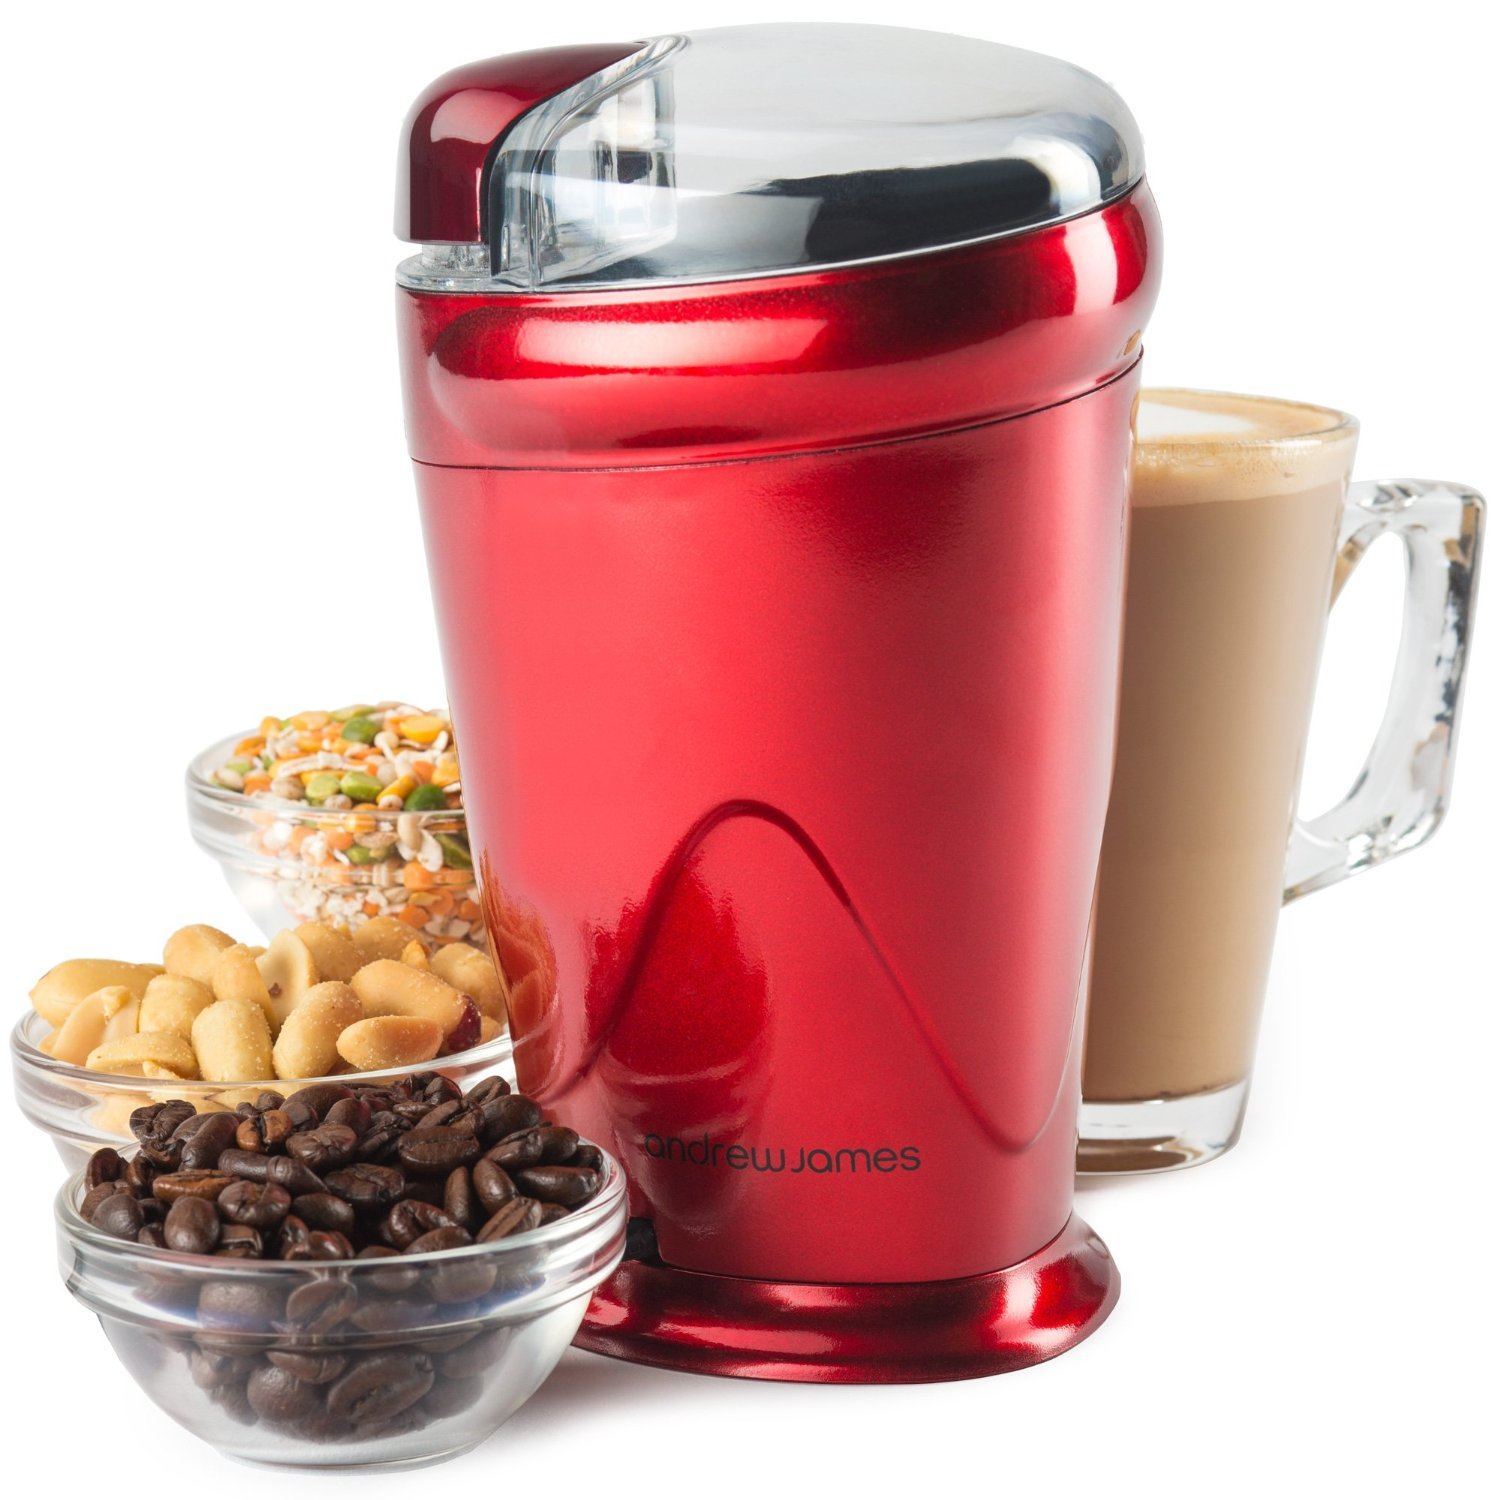 Andrew James Coffee, Nut and Spice Grinder In Red